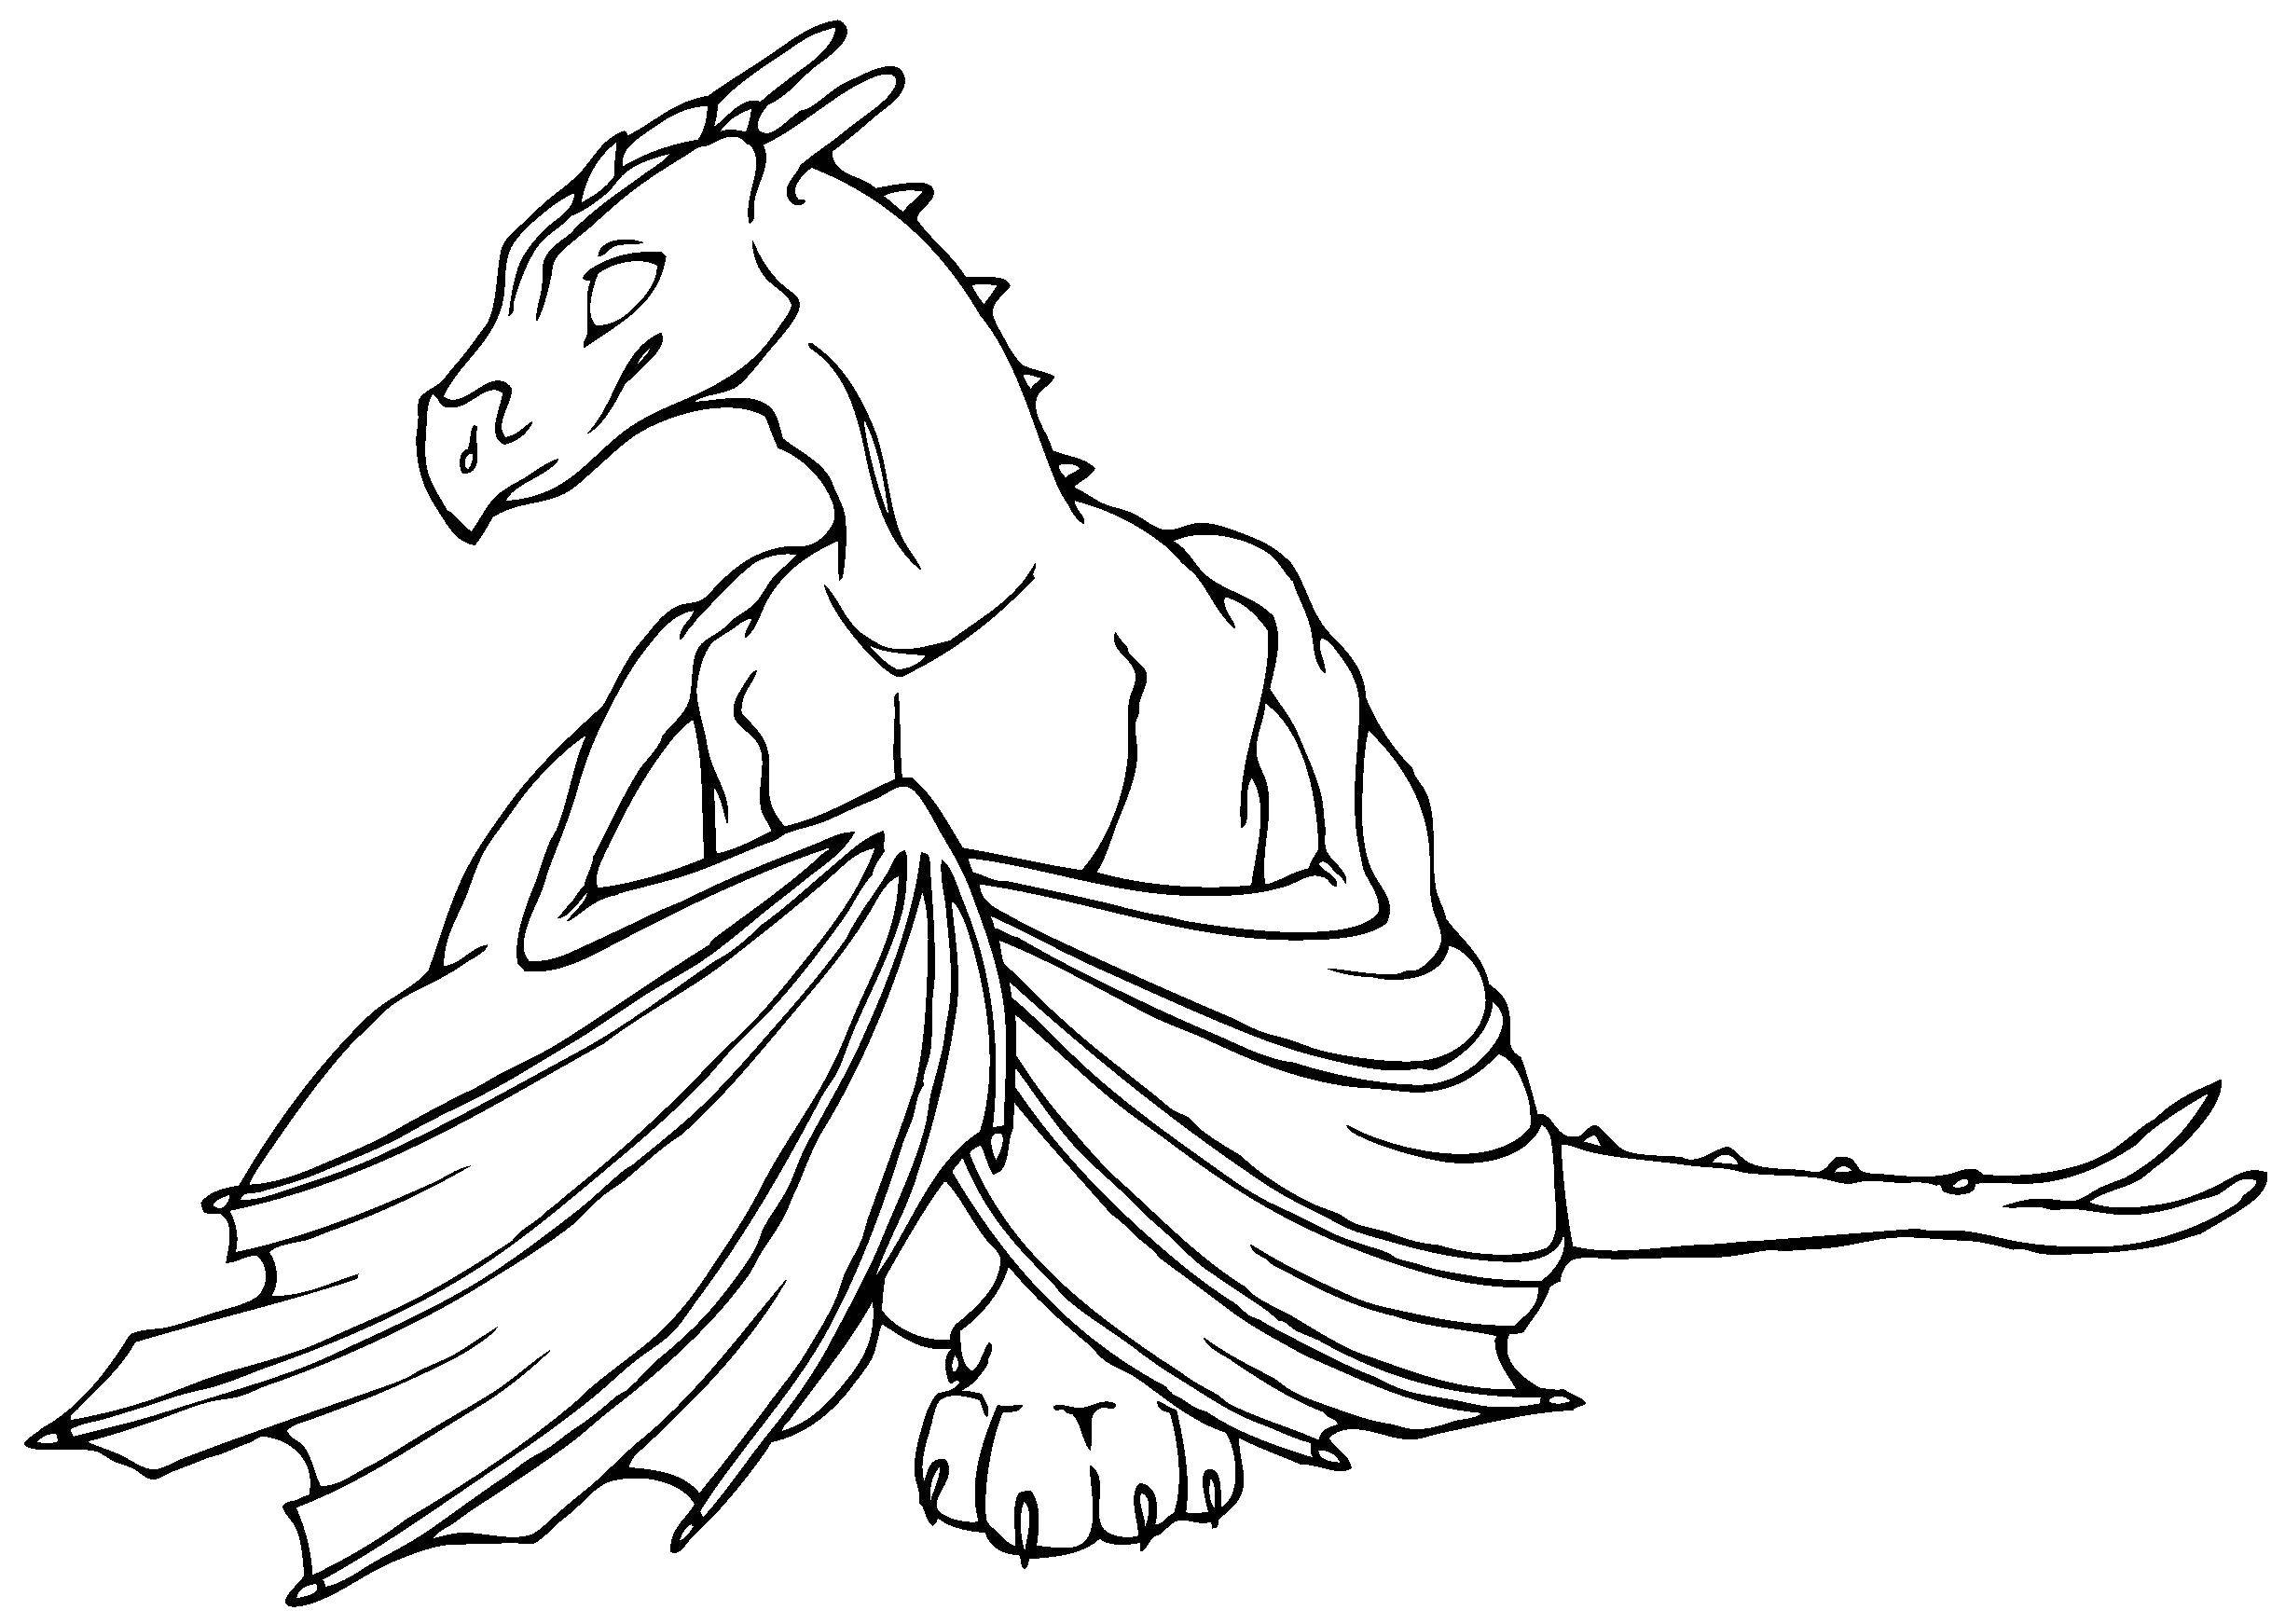 Coloring The dragon closed wings. Category Dragons. Tags:  dragons, dragon, wings.